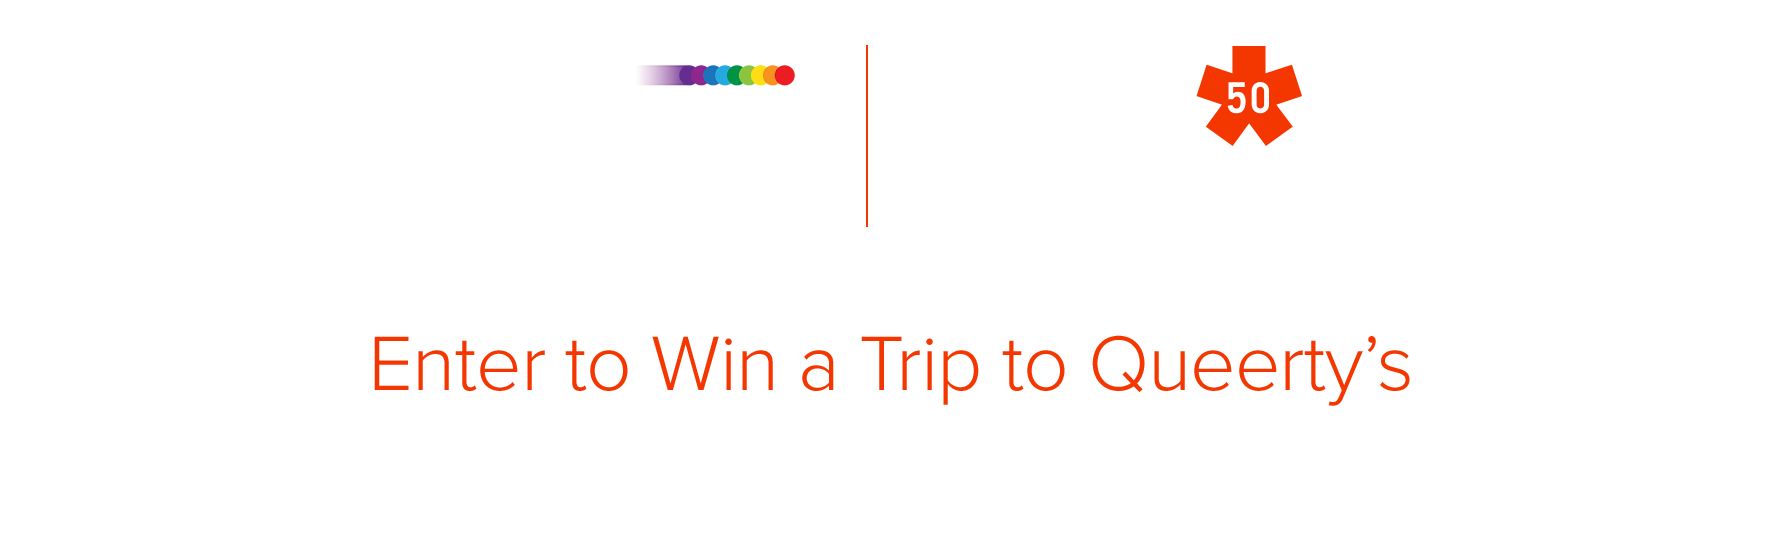 Enter to Win a Trip